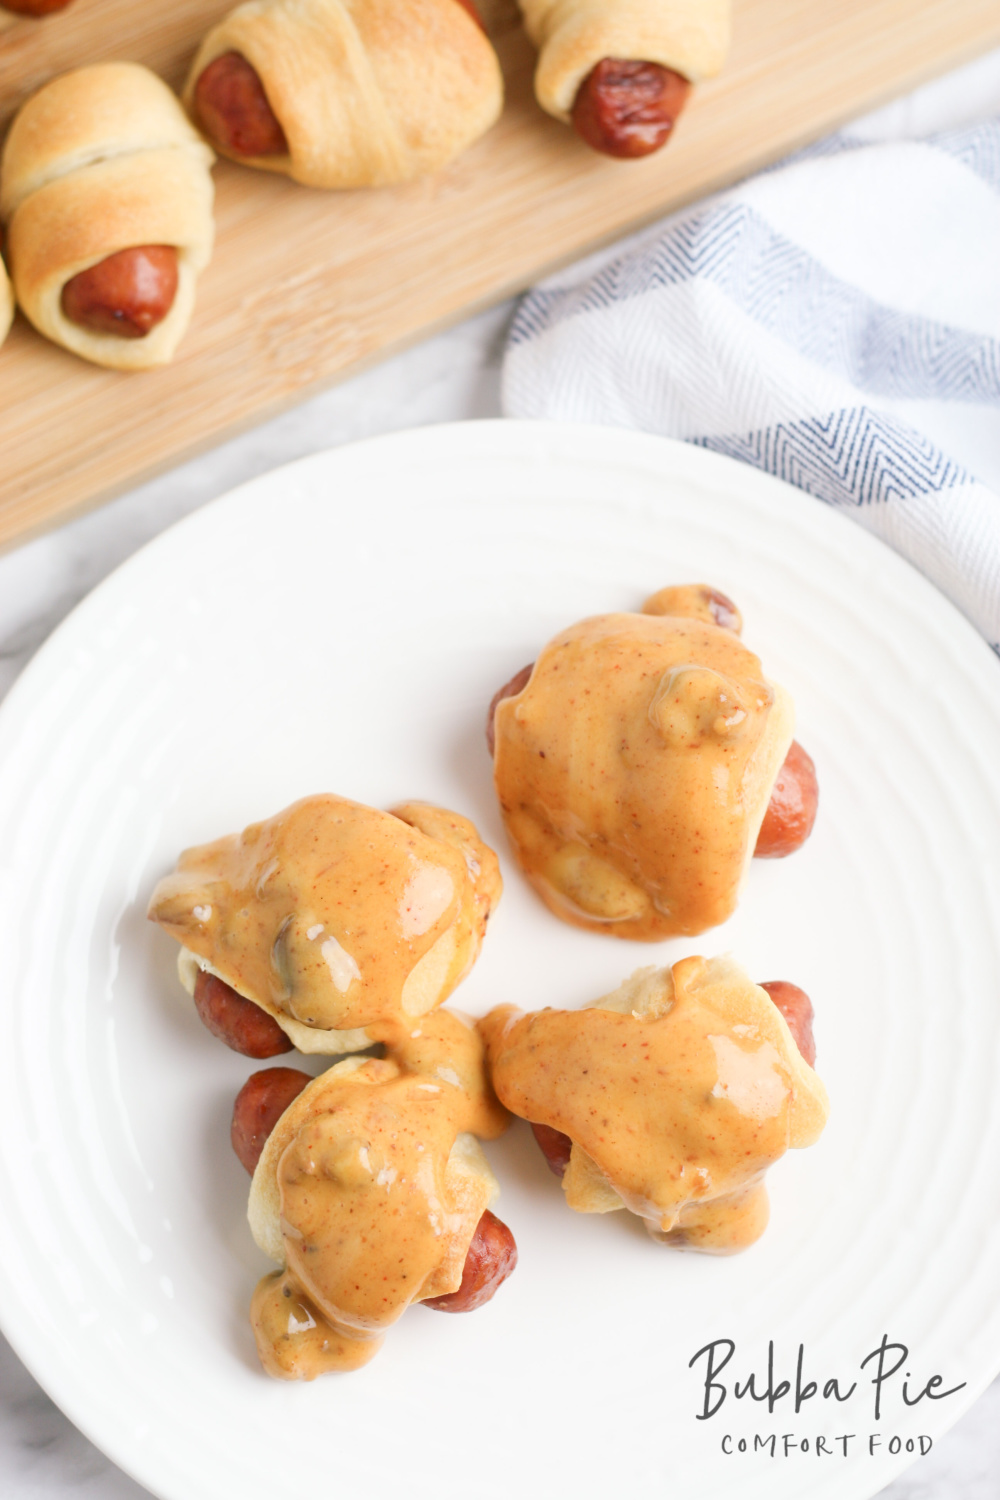 these mini pigs in blanket taste great when dipped into chili cheese sauce.